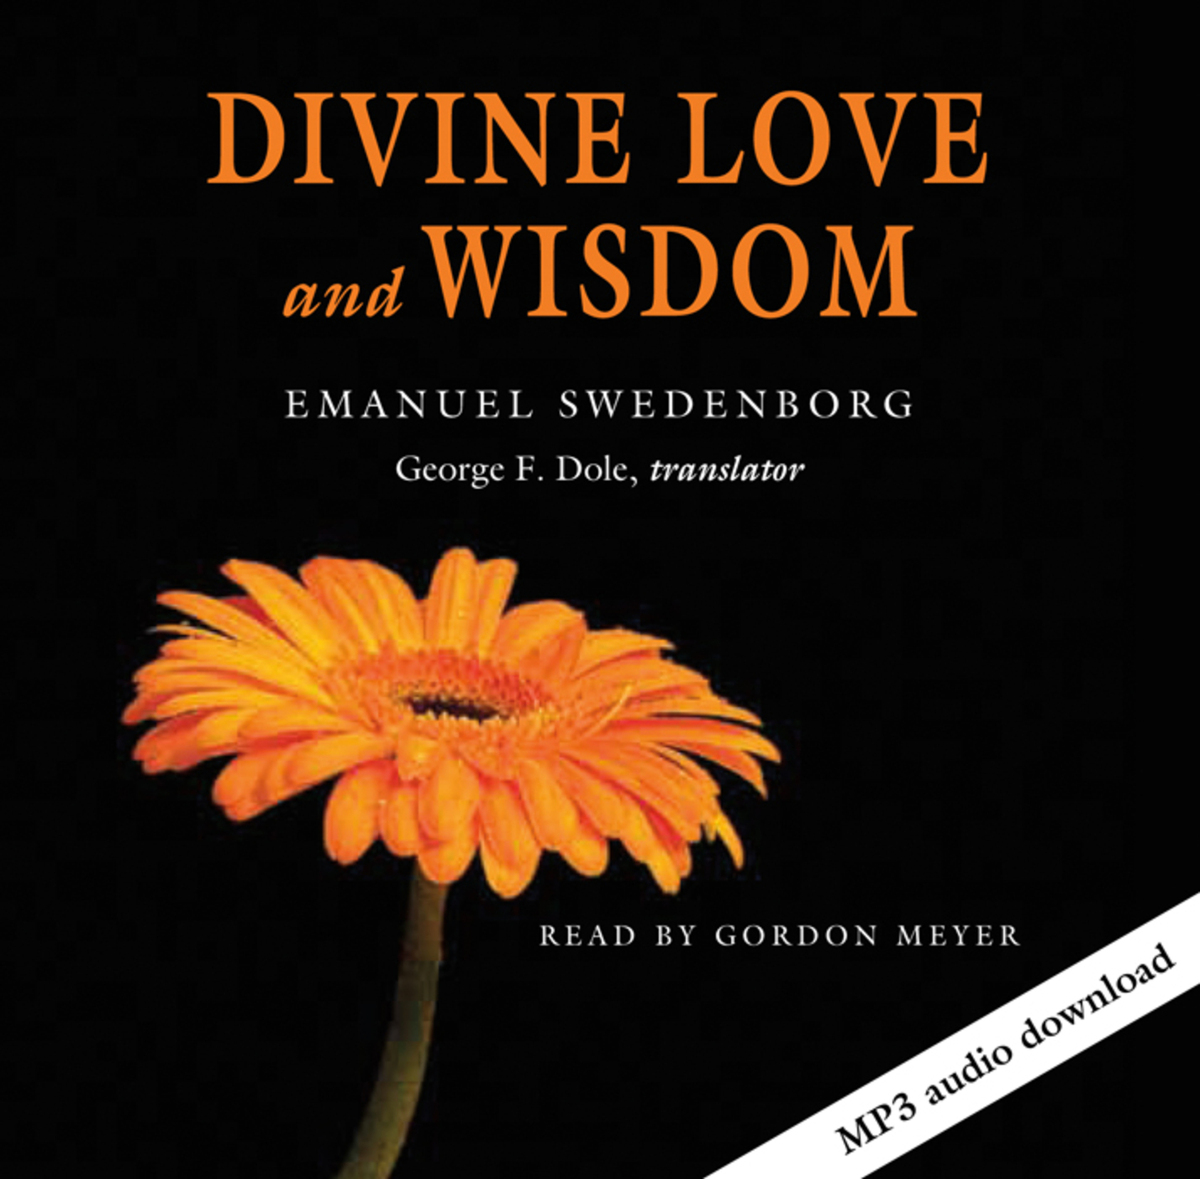 Divine Love and Wisdom (New Century Edition) Emanuel Swedenborg and George F. Dole